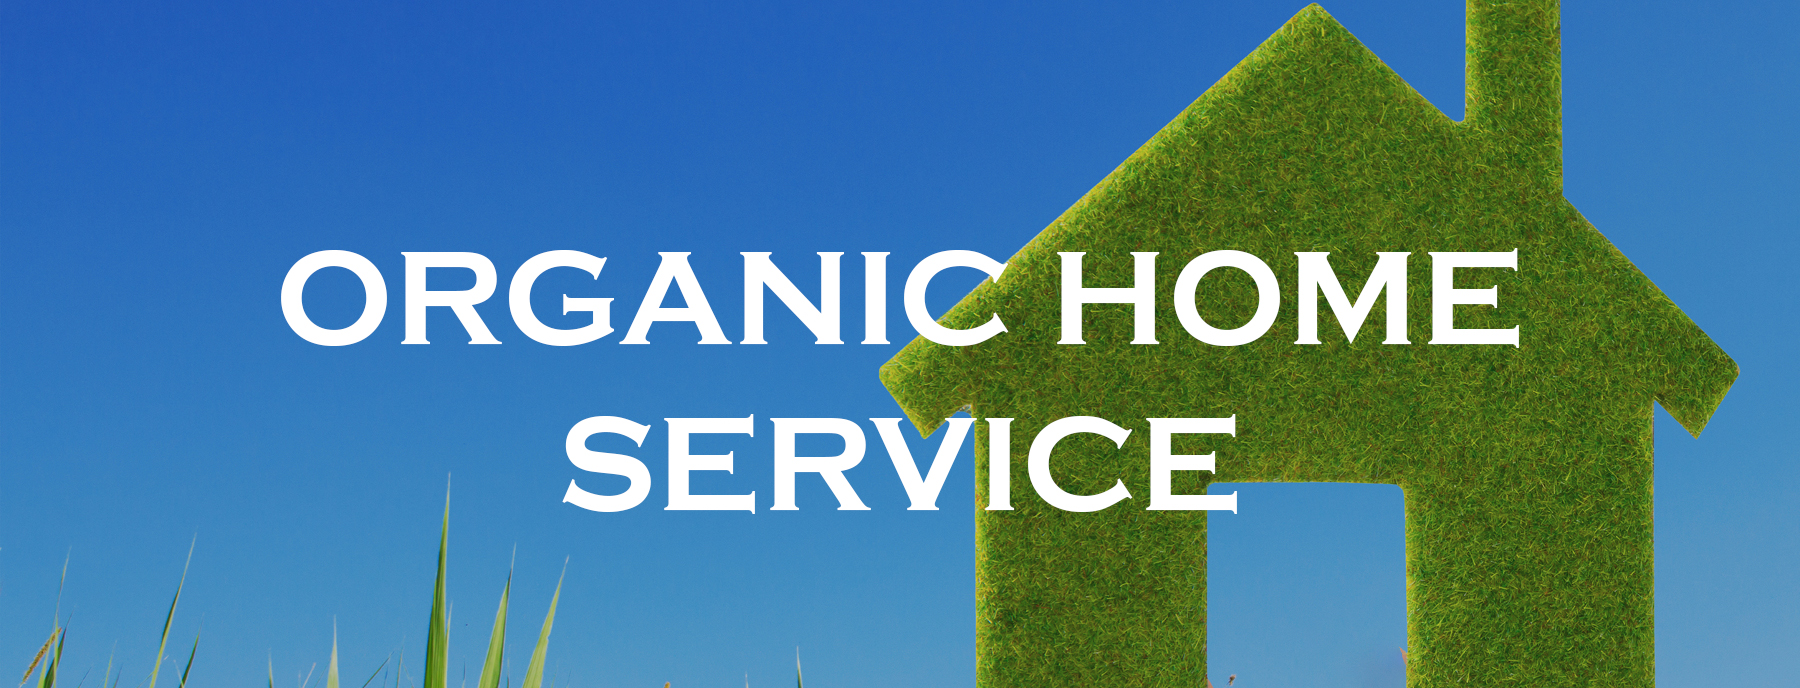 Cleaning Services in Dallas Organic Home Service